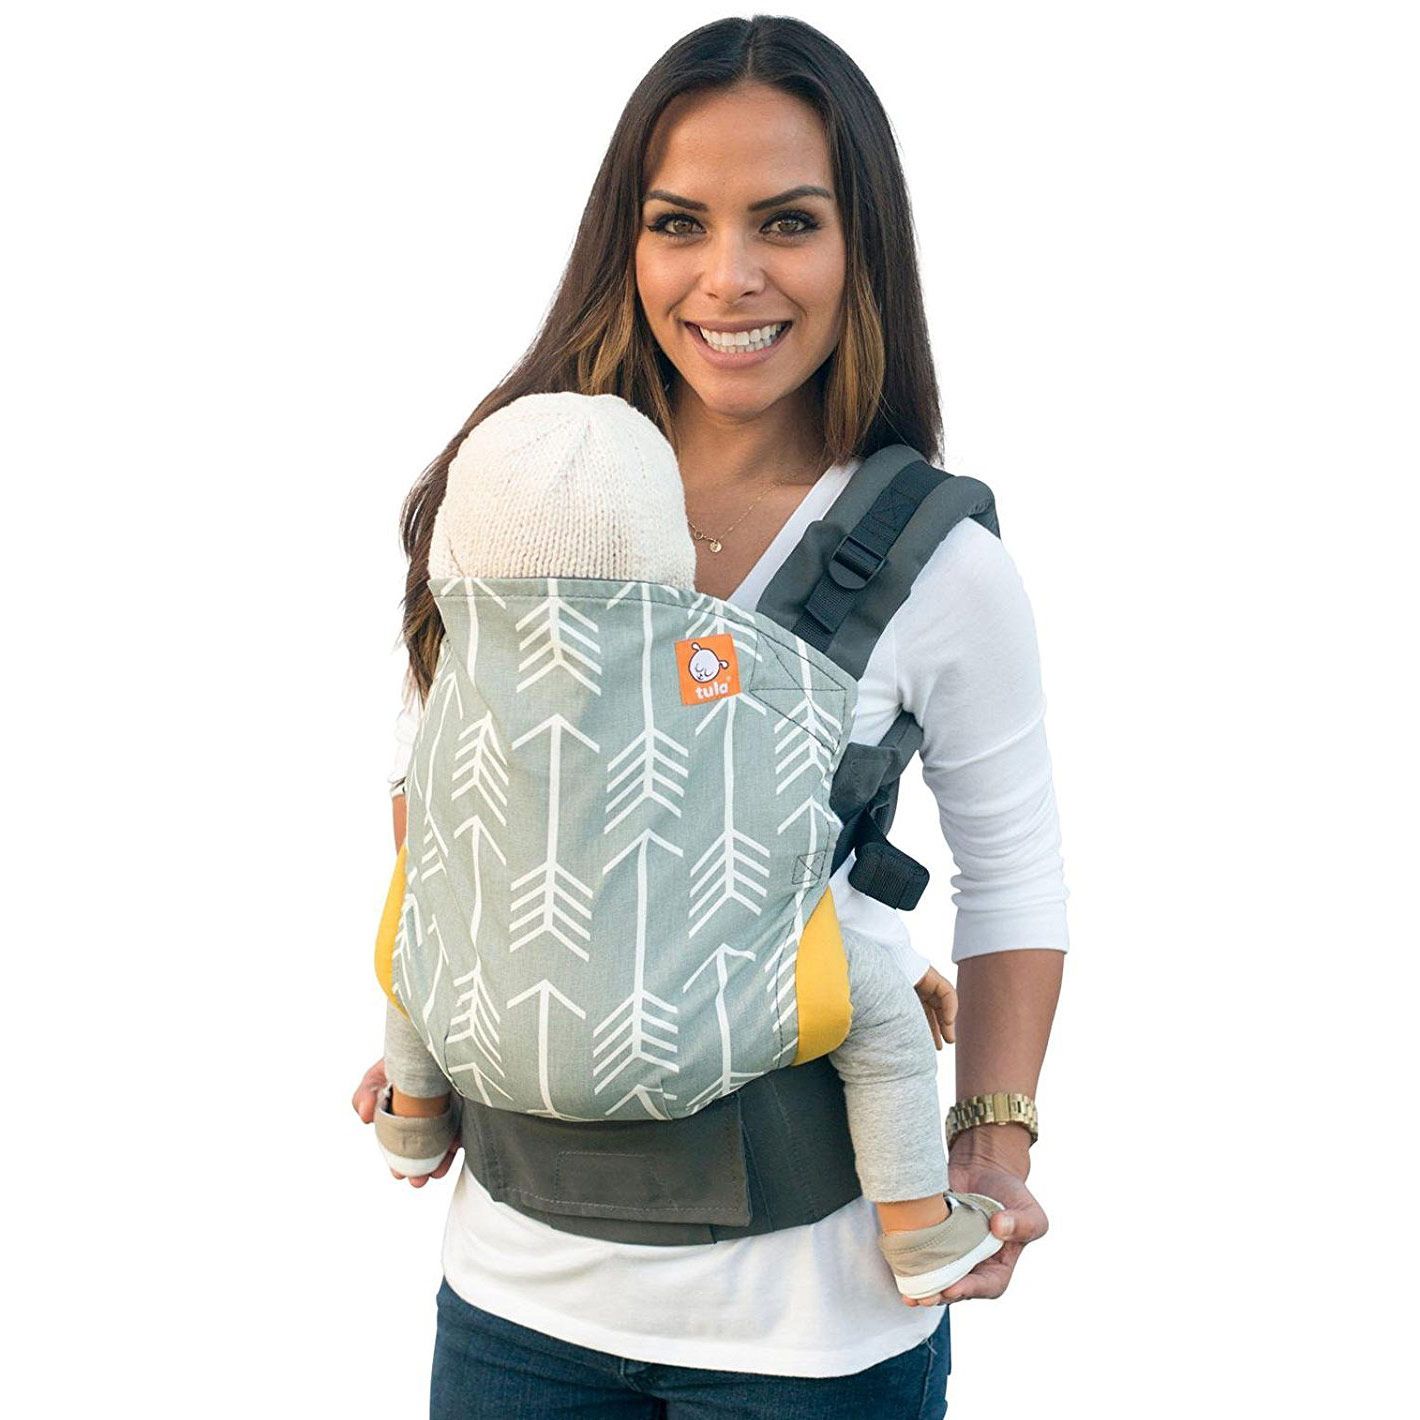 best baby carrier for 4 month old